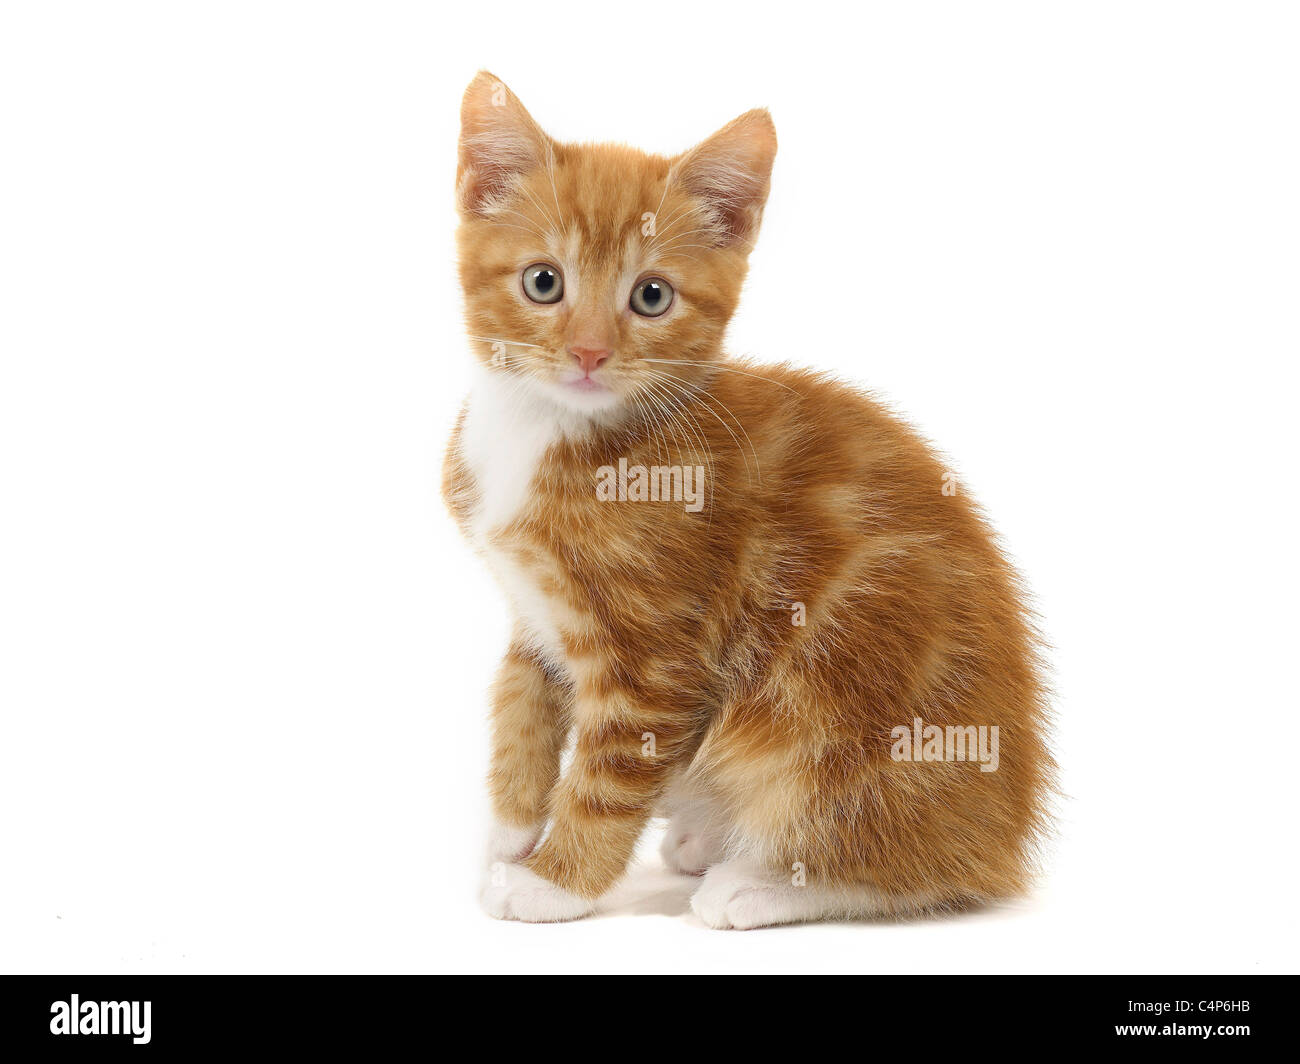 A small ginger and white kitten. Stock Photo